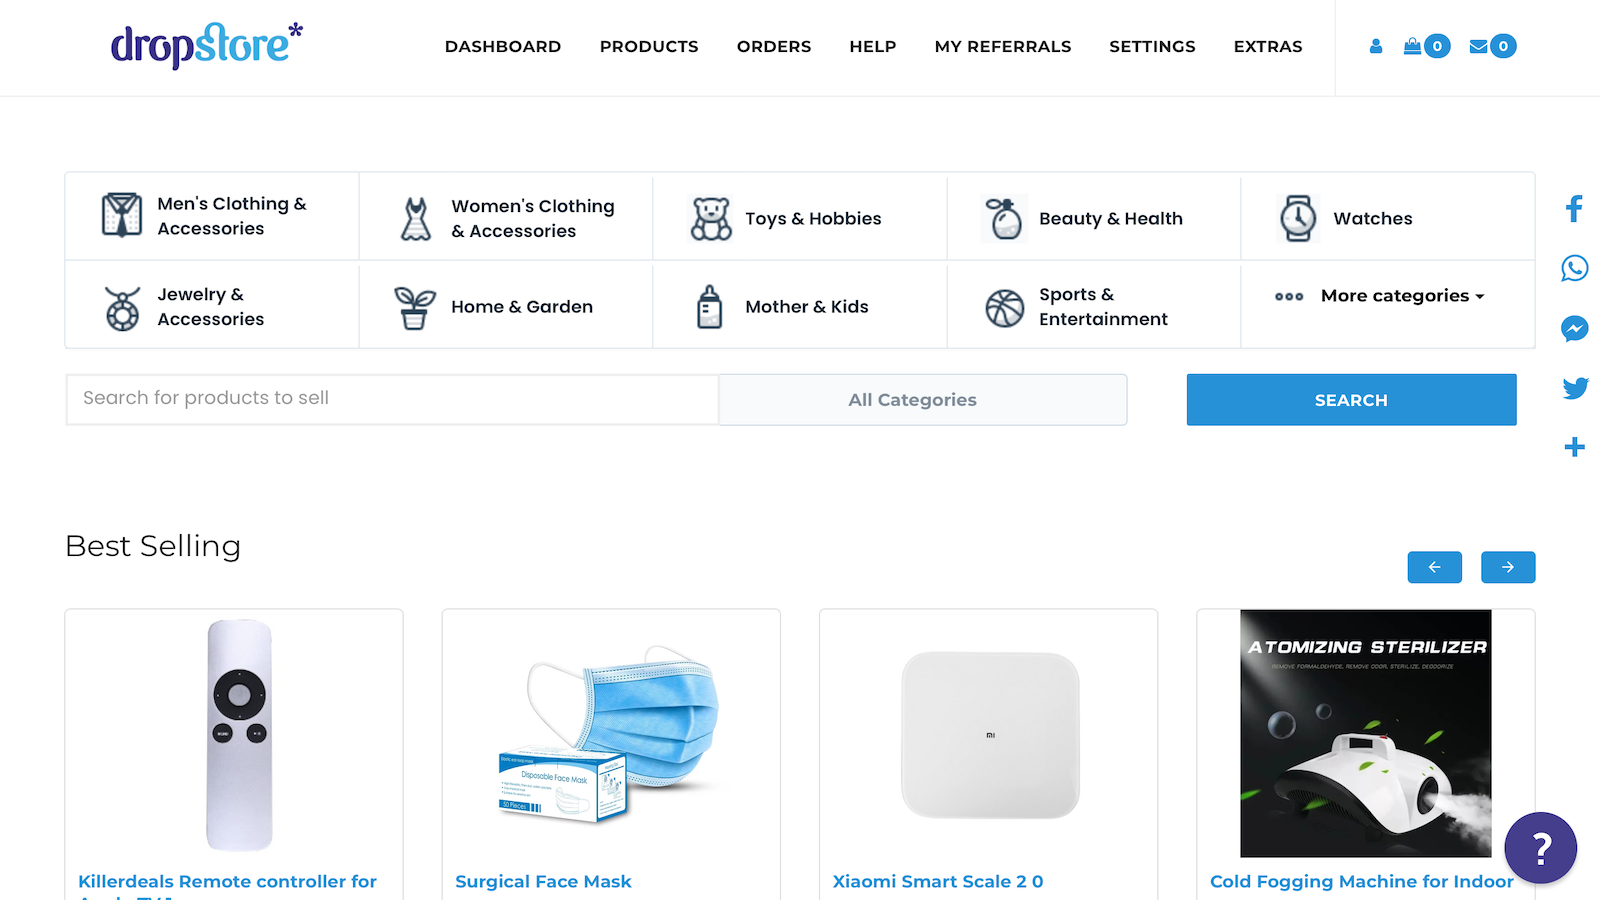 Search for products with ease